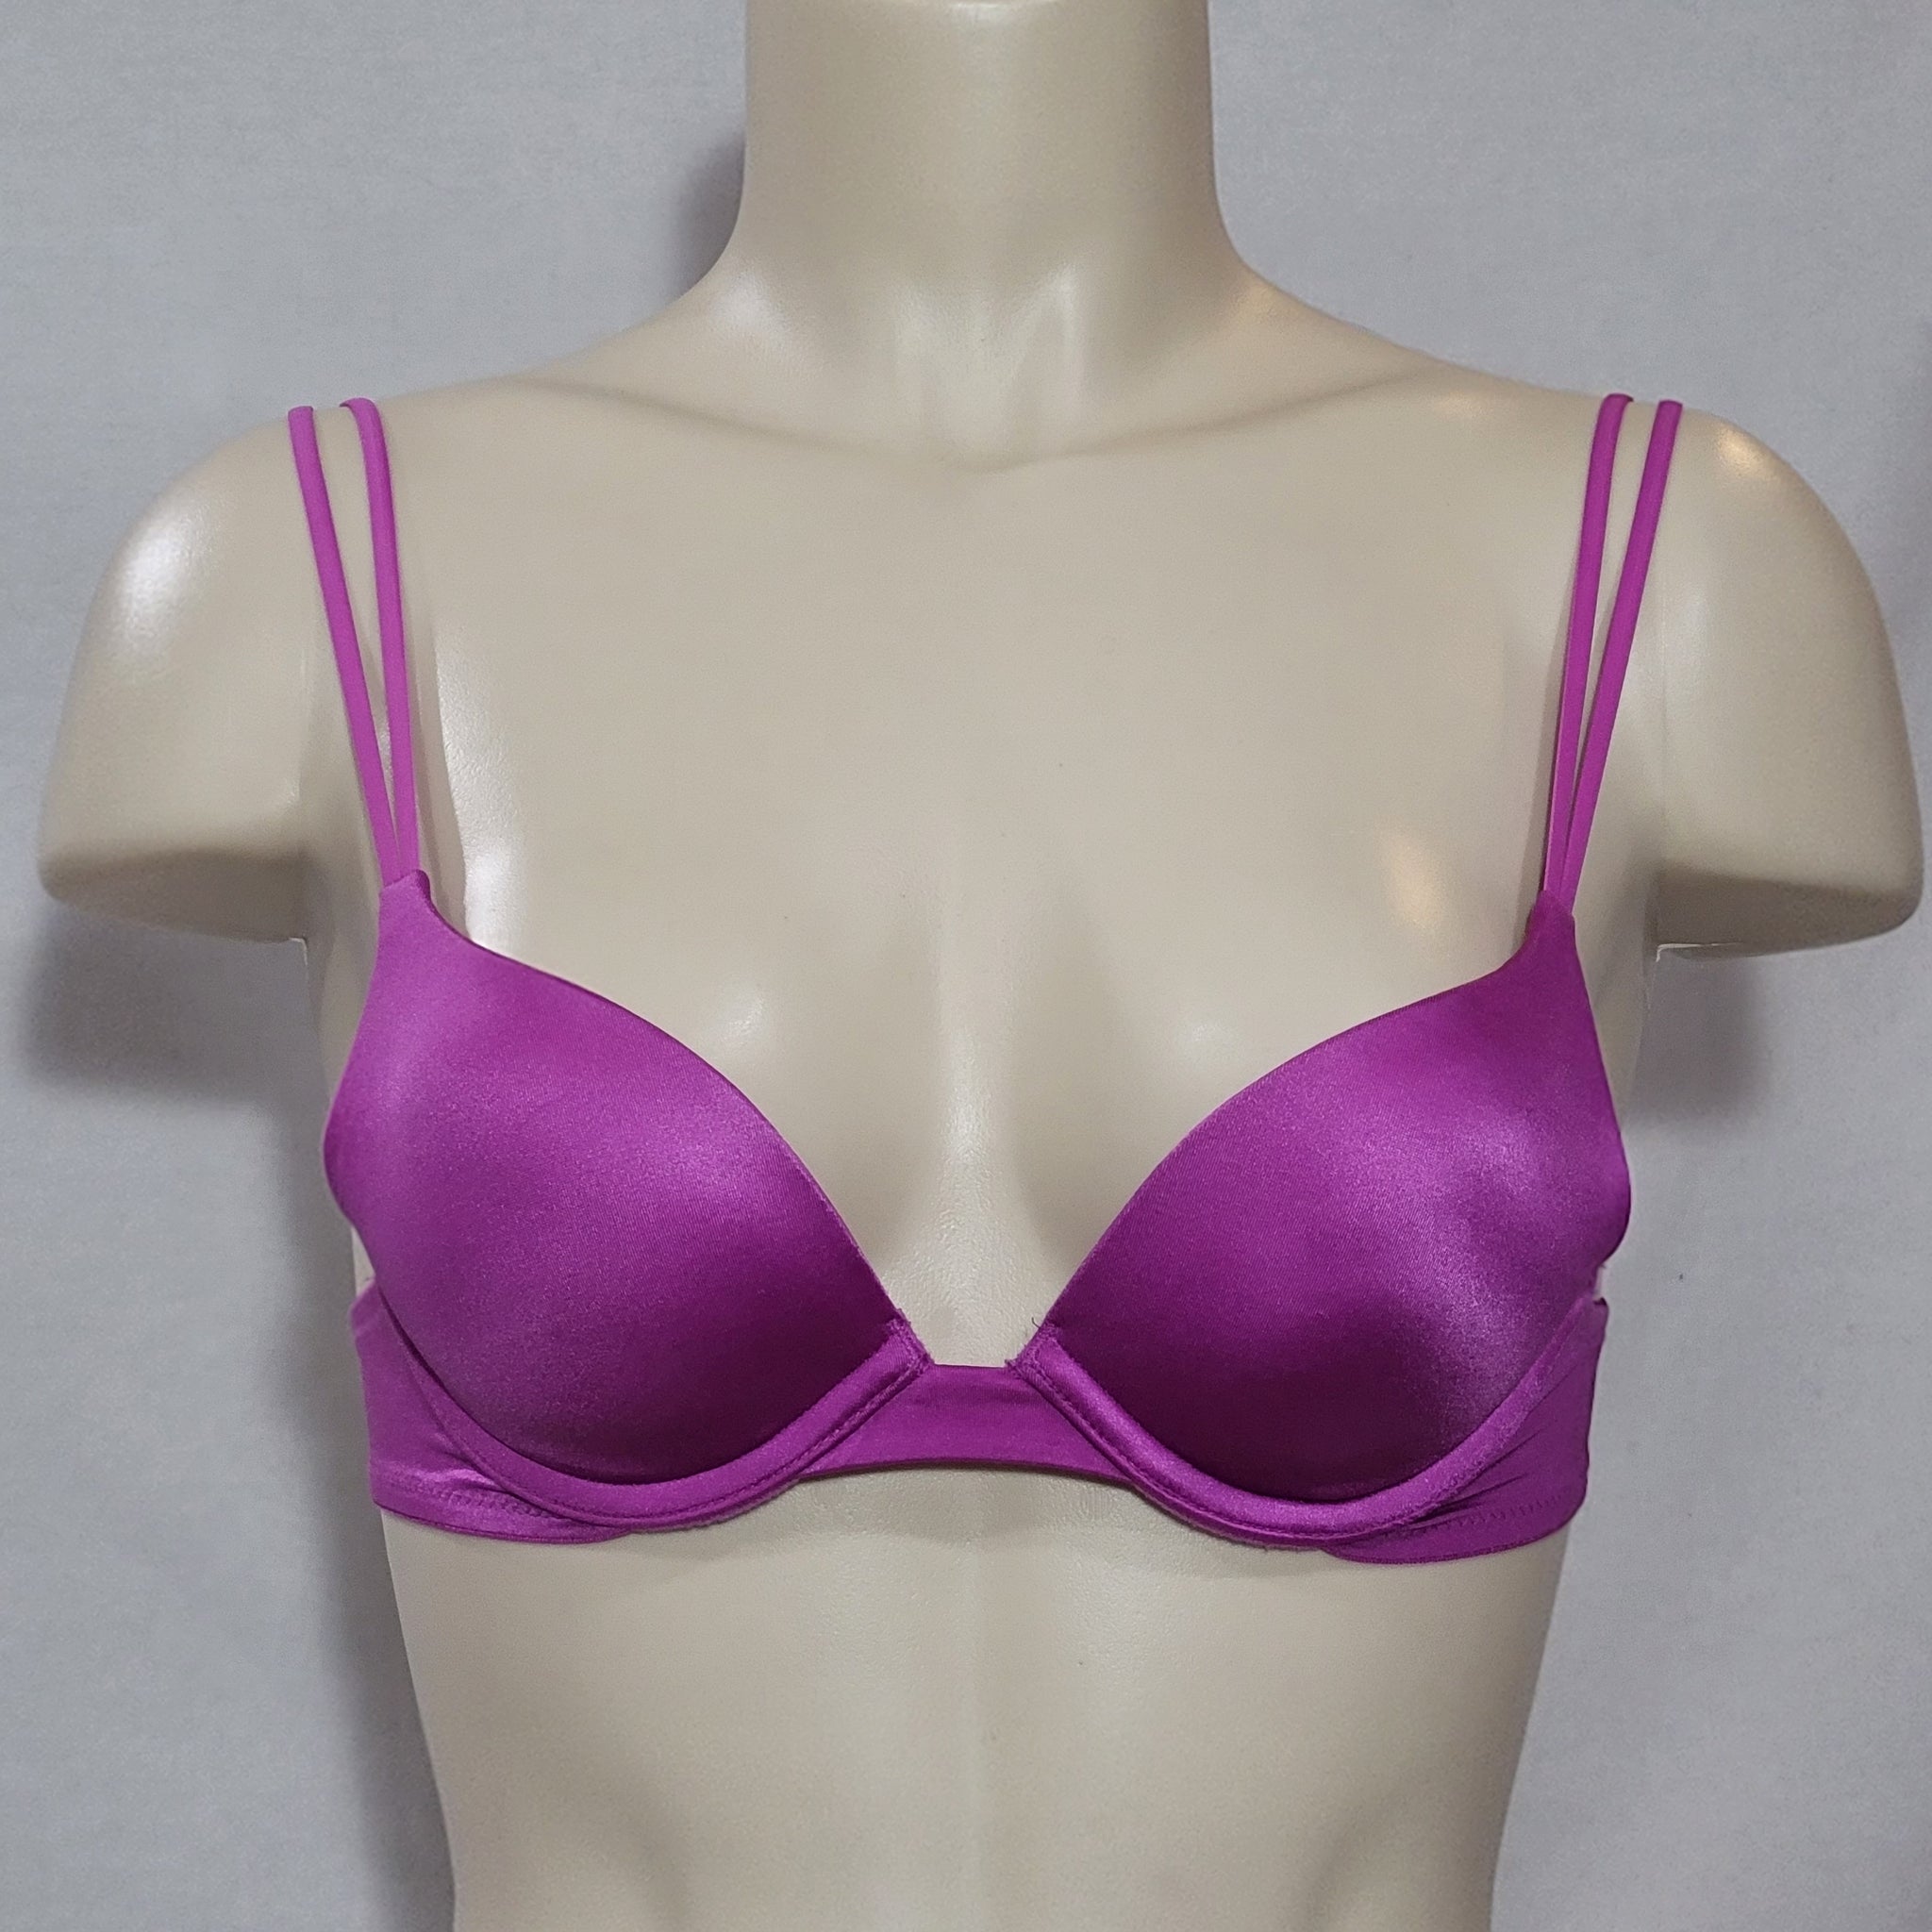 32a Pink Push Up Bra - Get Best Price from Manufacturers